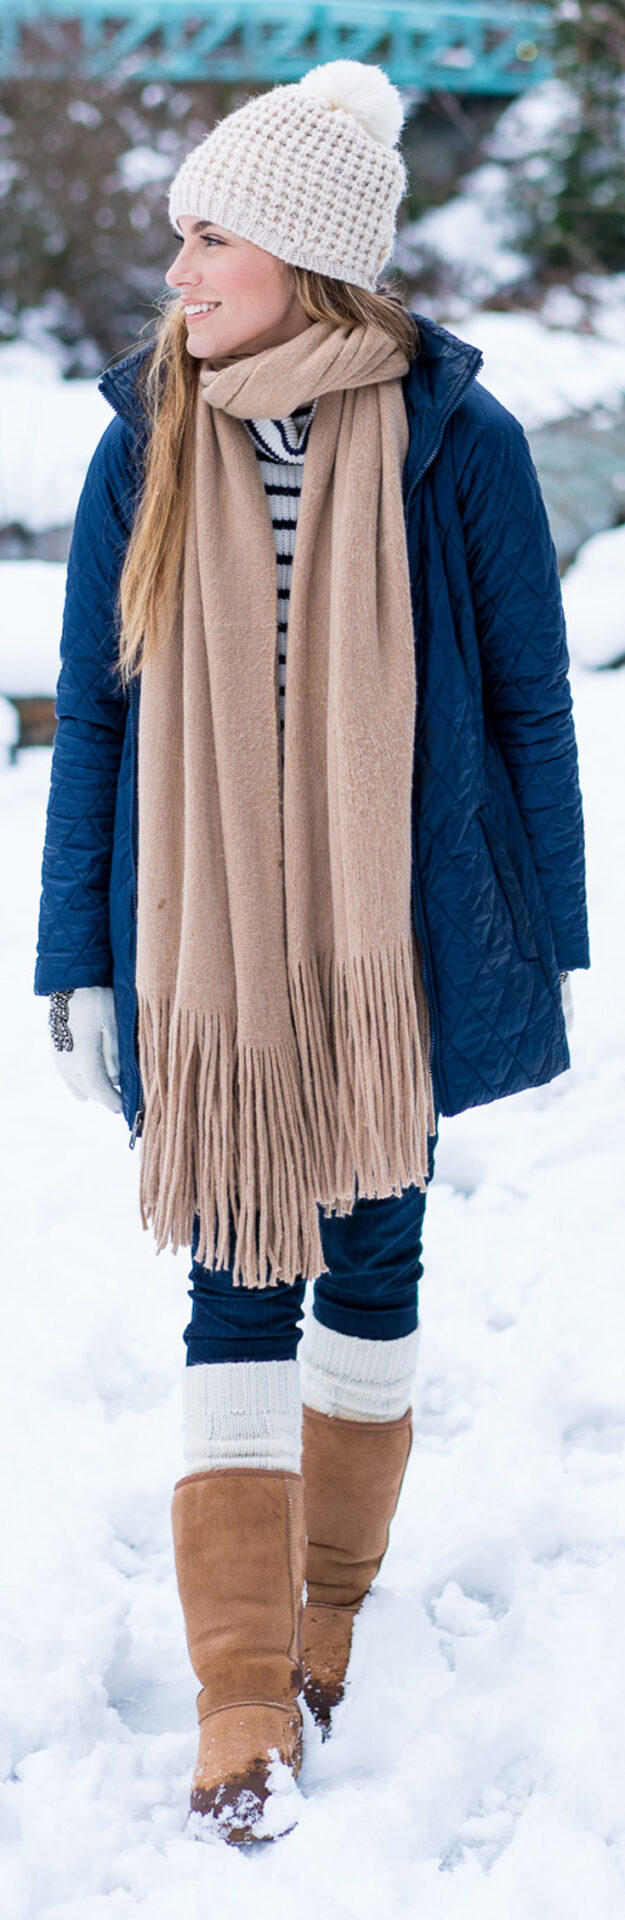 Stripe Turtleneck Sweater, Hudson High Waist Skinny Jeans, The North Face Coat, Beanie, Fringe Scarf, uggs. Angela Lanter from Hello Gorgeous, outfits.